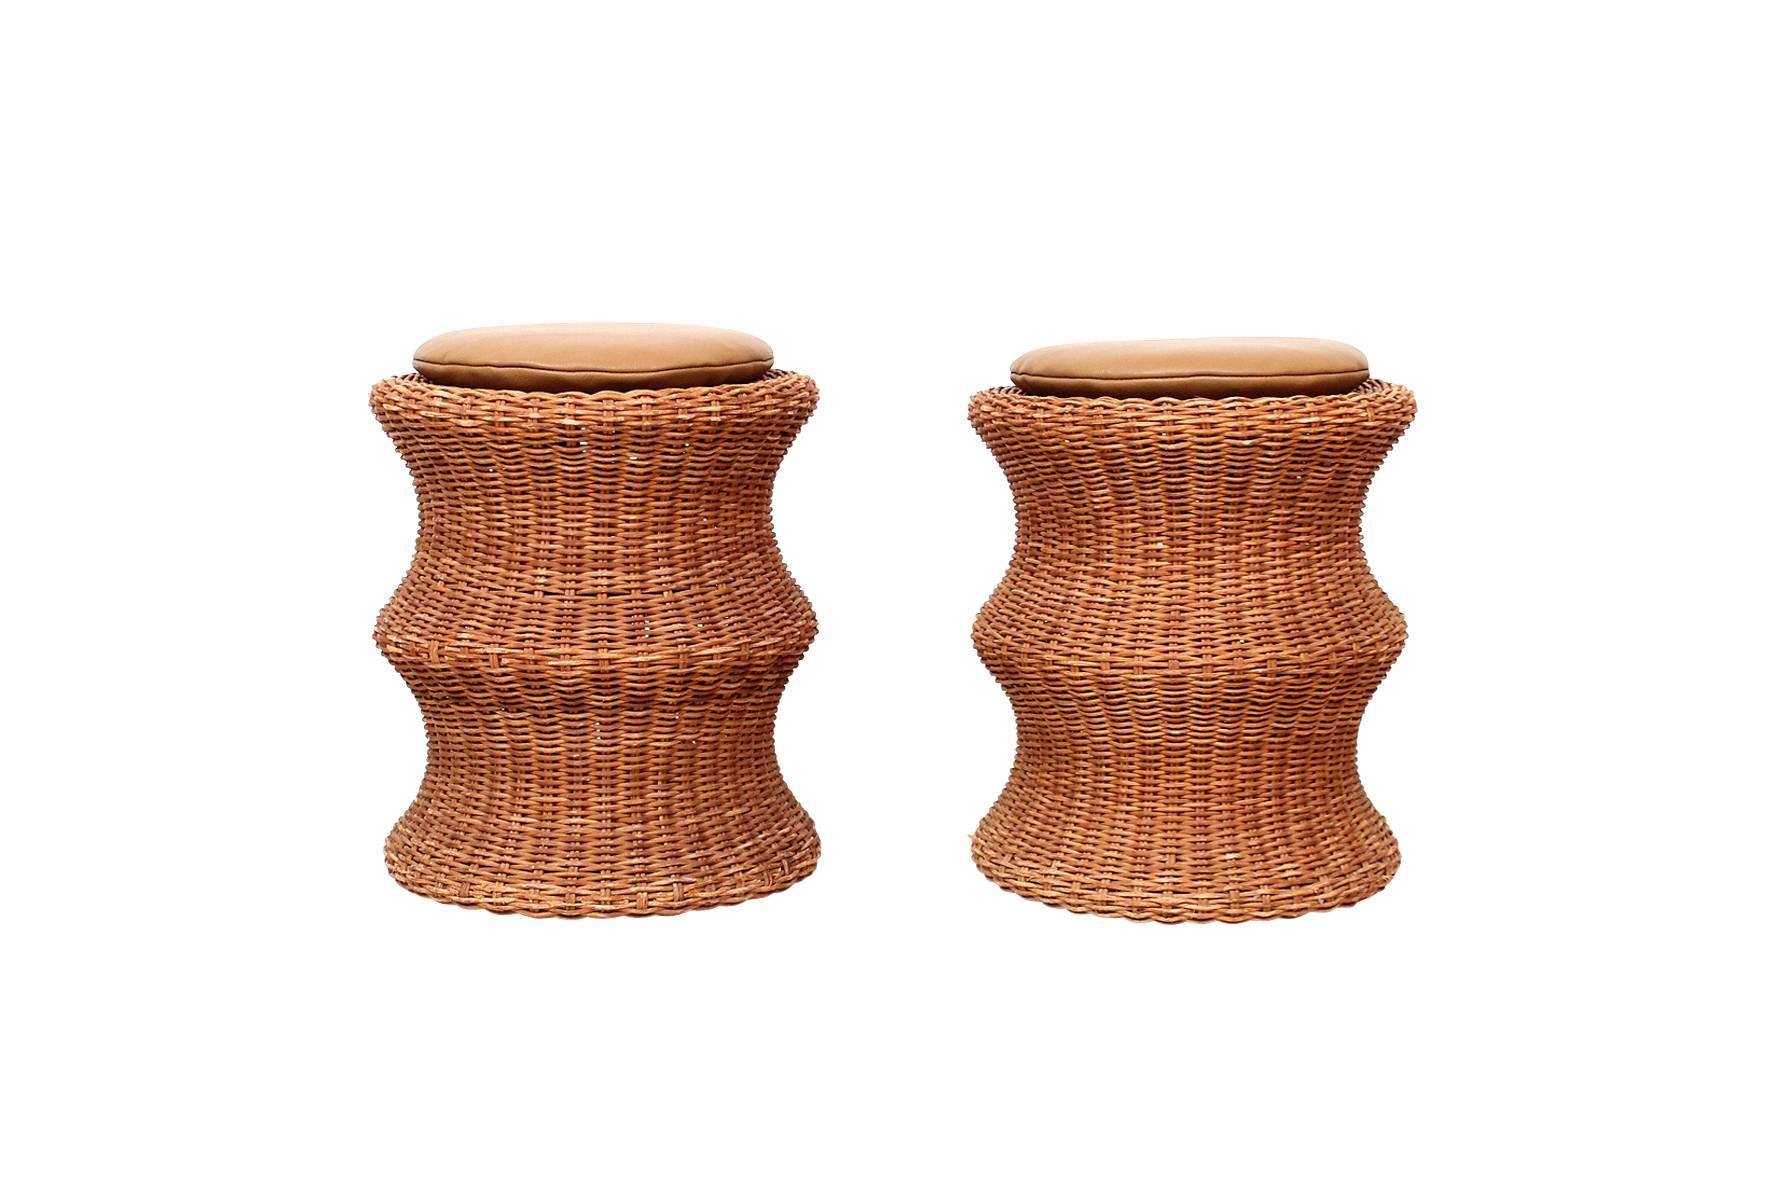 Early matched pair of "Juttu" stools by Eero Aarnio. Can be used as footstools or side tables. Original wicker has a pleasant golden patina. Made by Sokeva in Finland, circa 1960s. One example retains original decal "DESIGN EERO